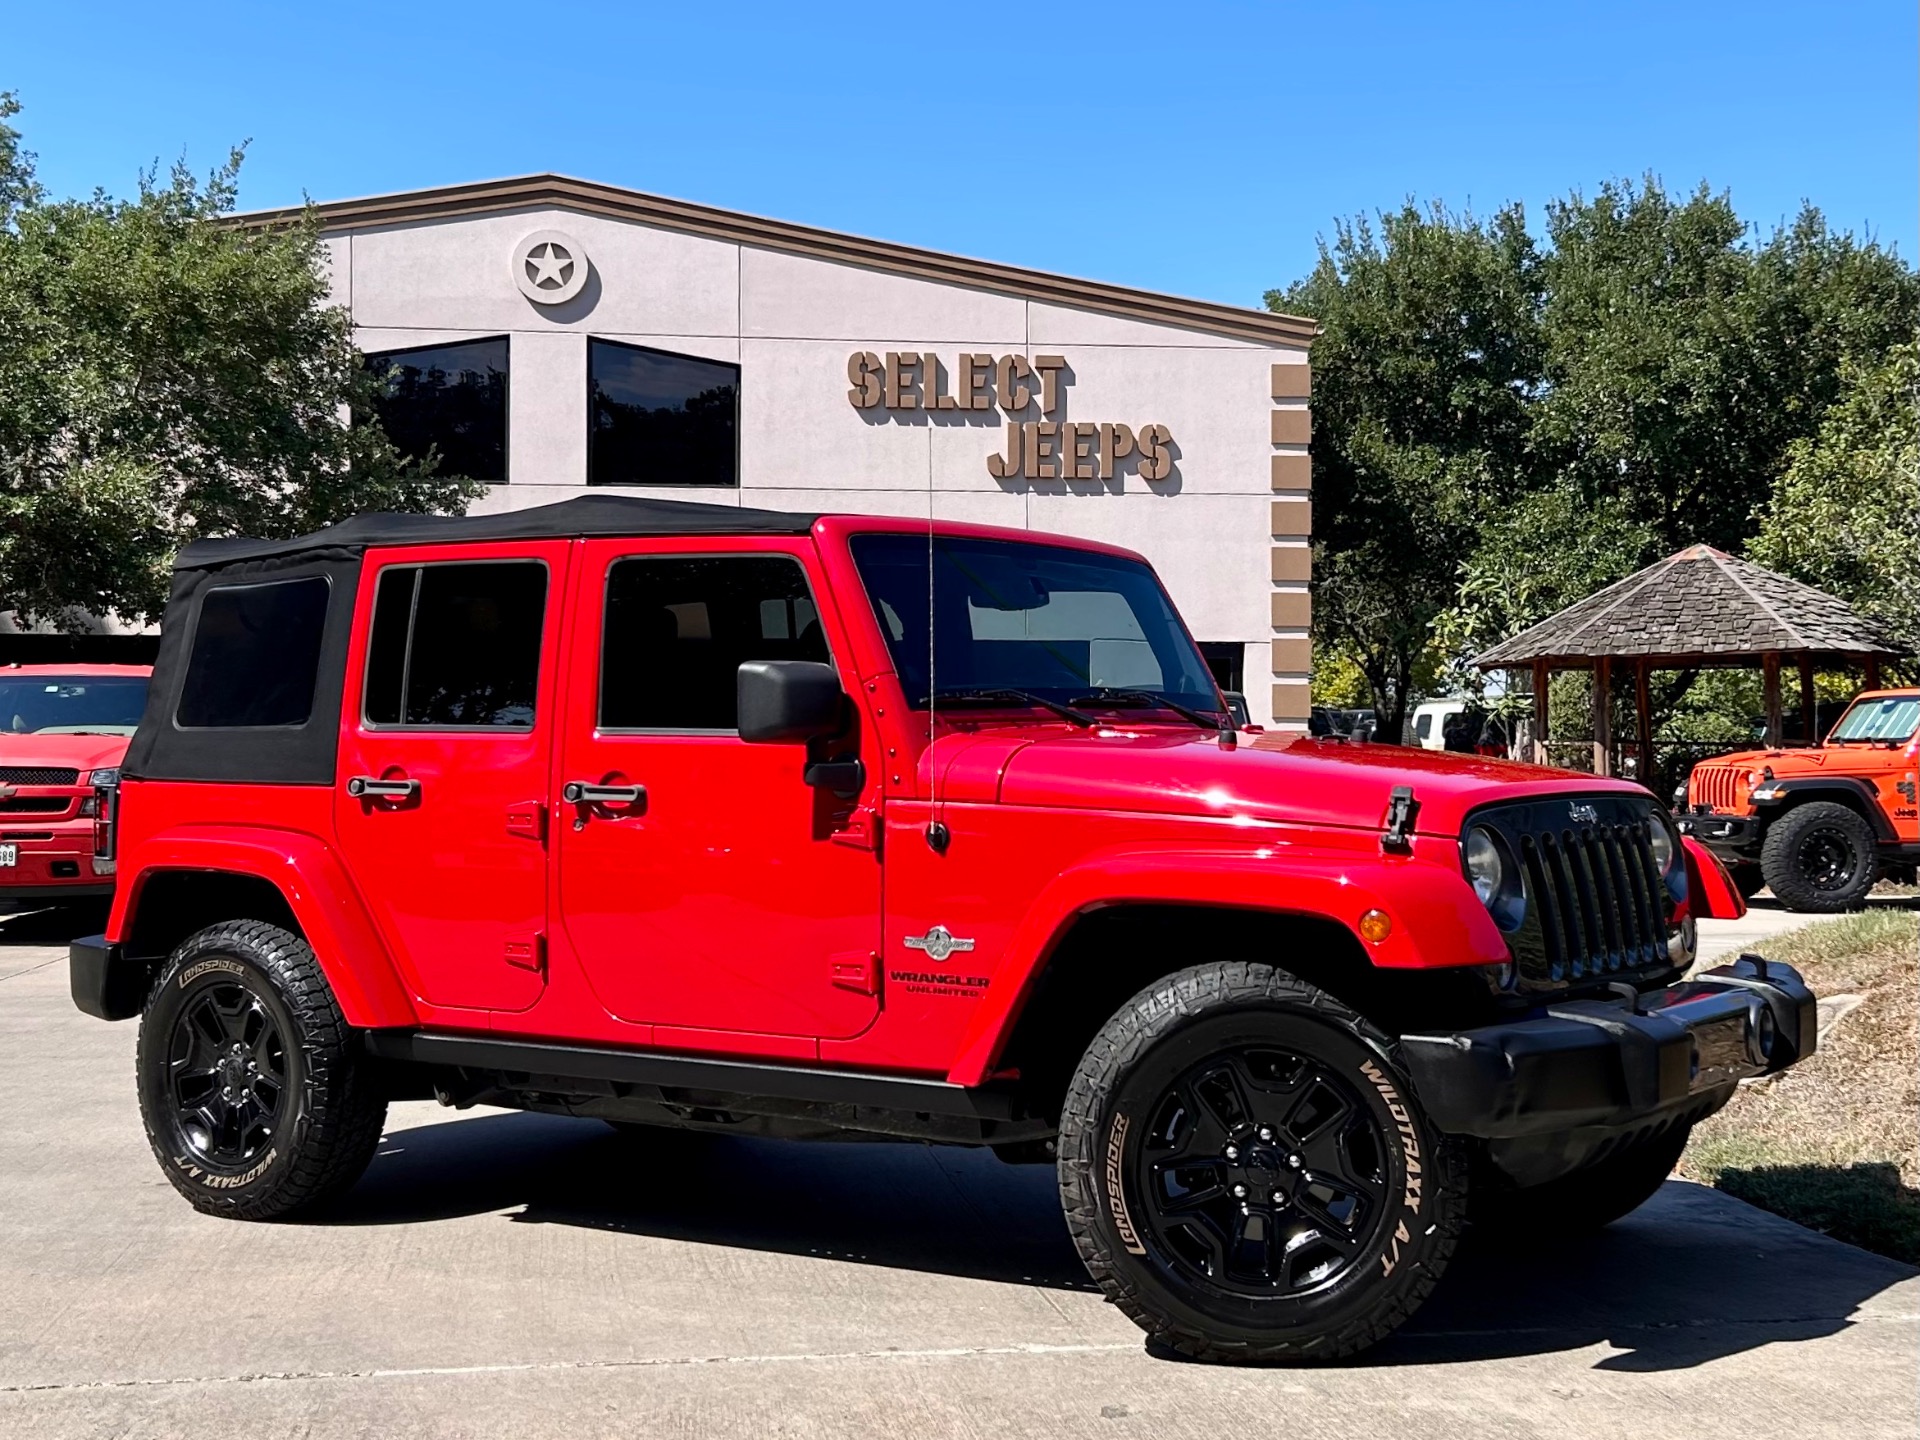 Used-2014-Jeep-Wrangler-Unlimited-Freedom-Edition